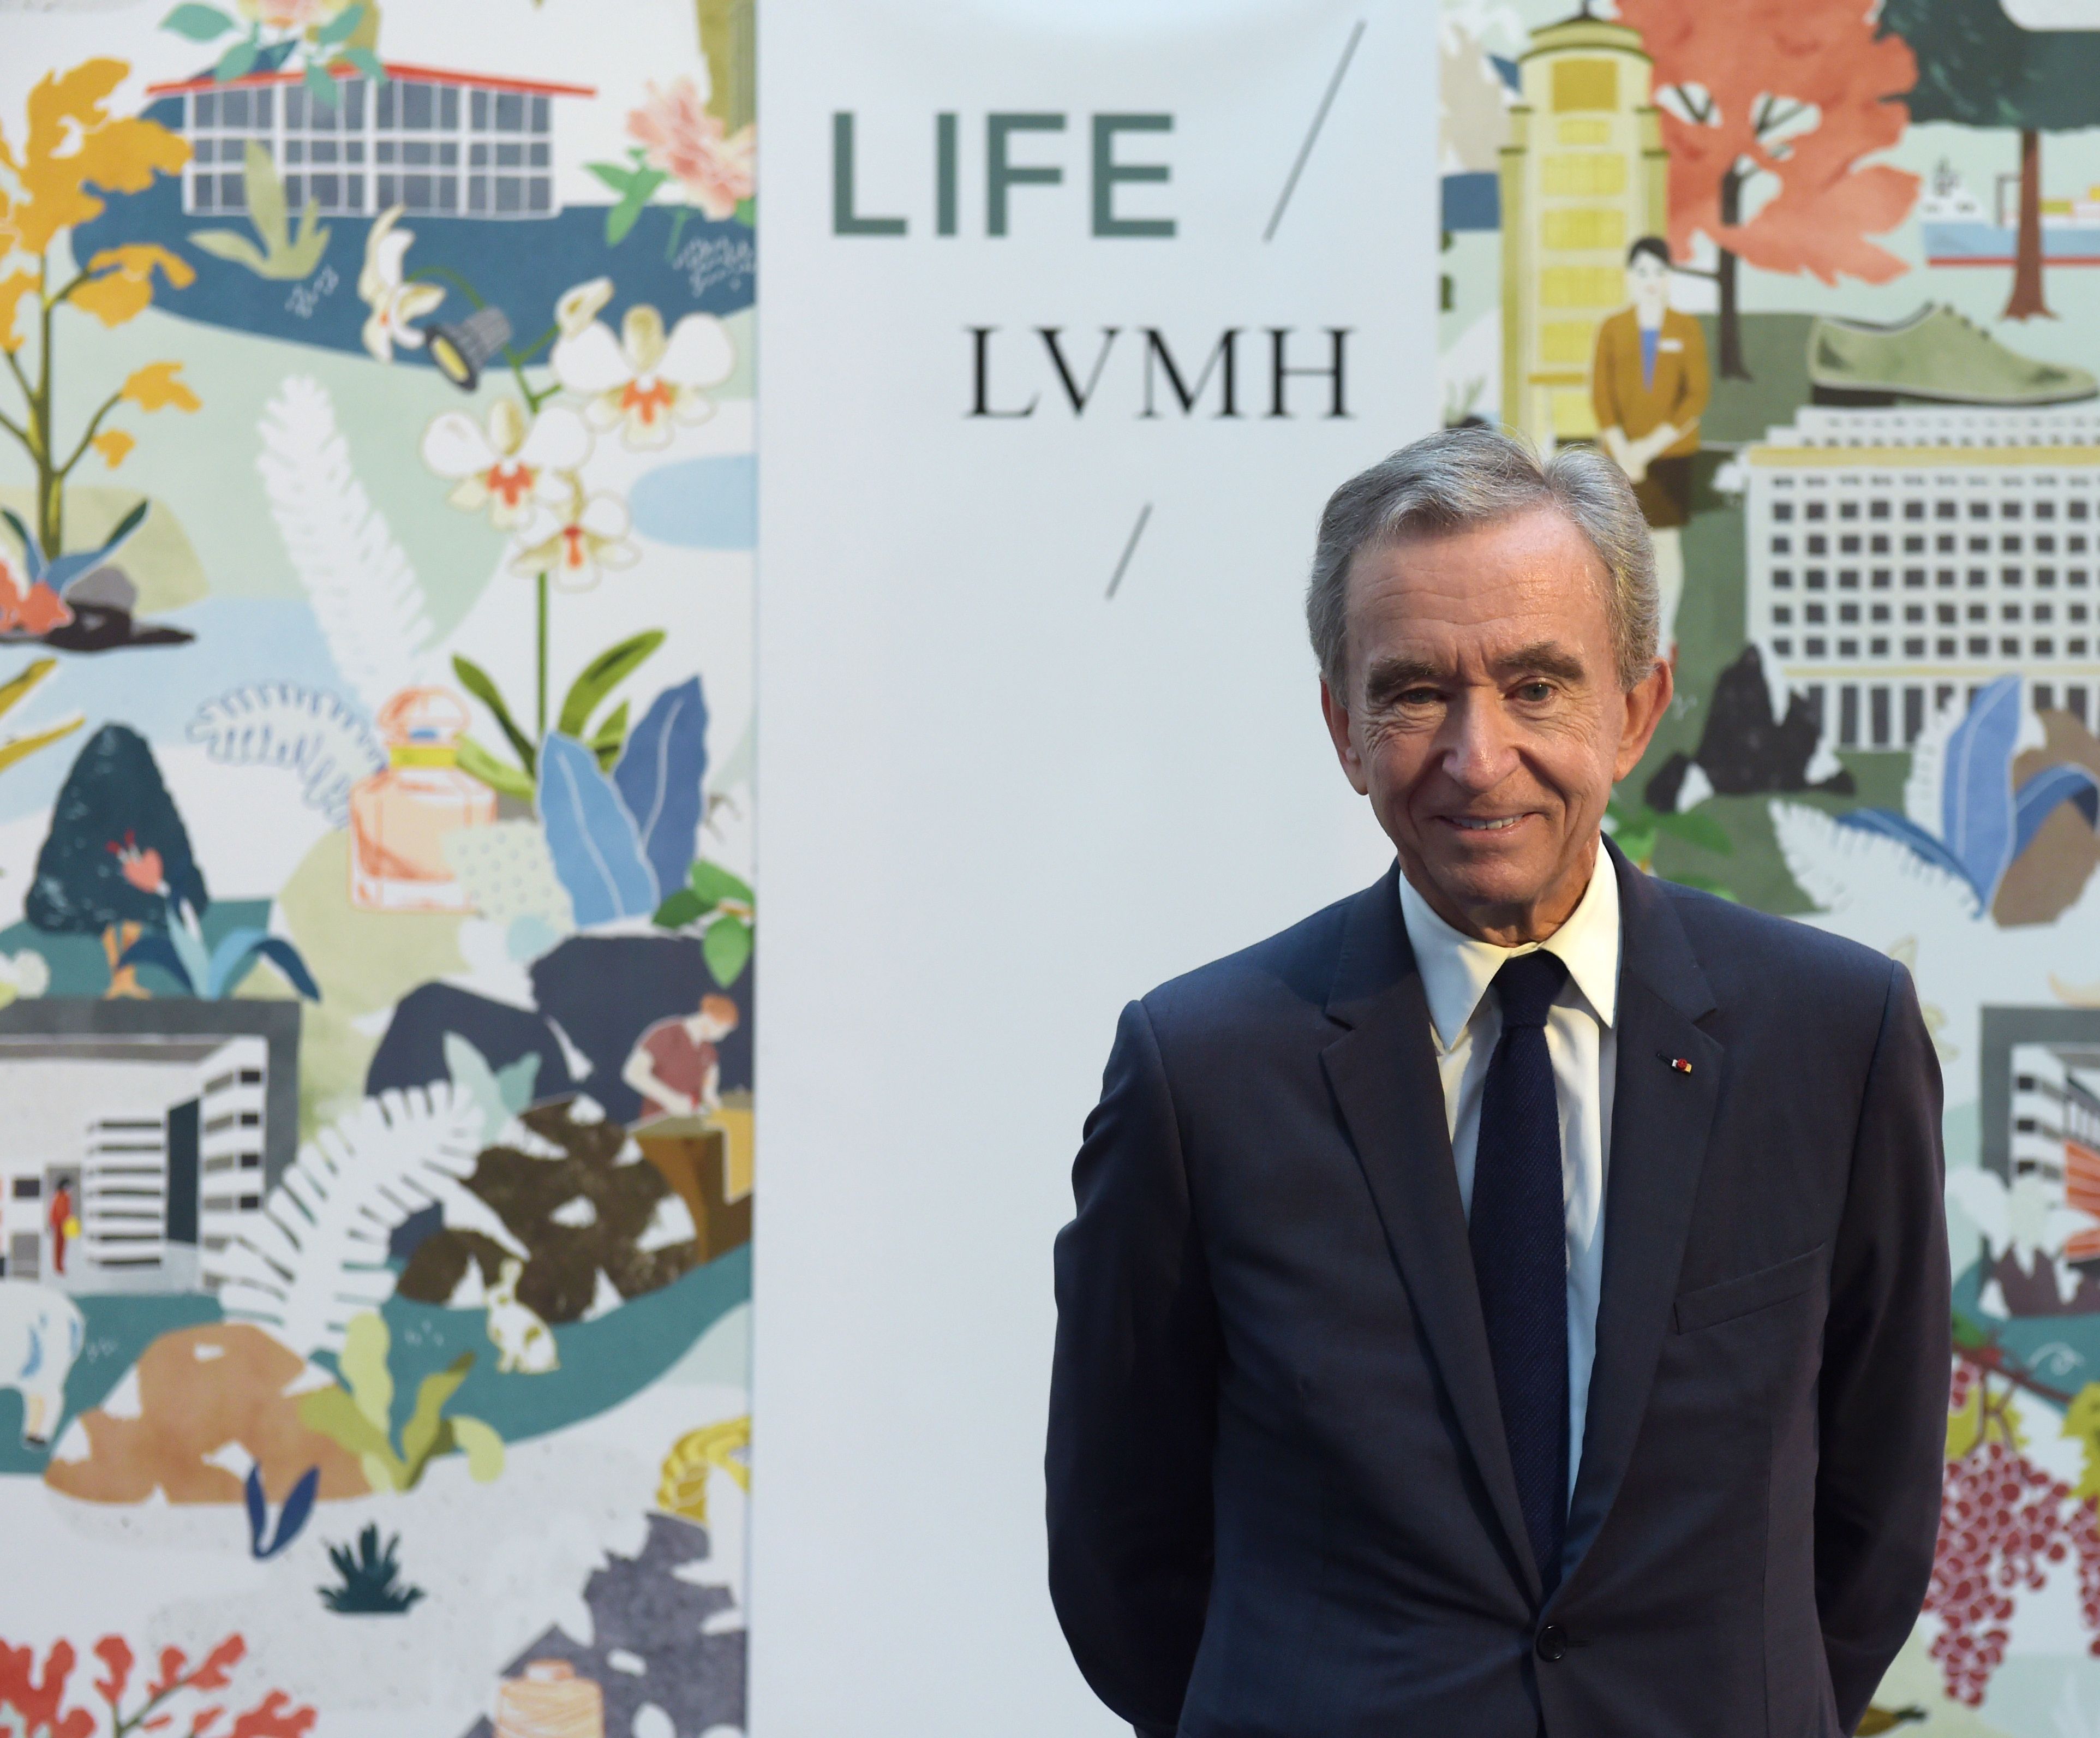 Bernard Arnault’s Net Worth 5 Fast Facts You Need to Know